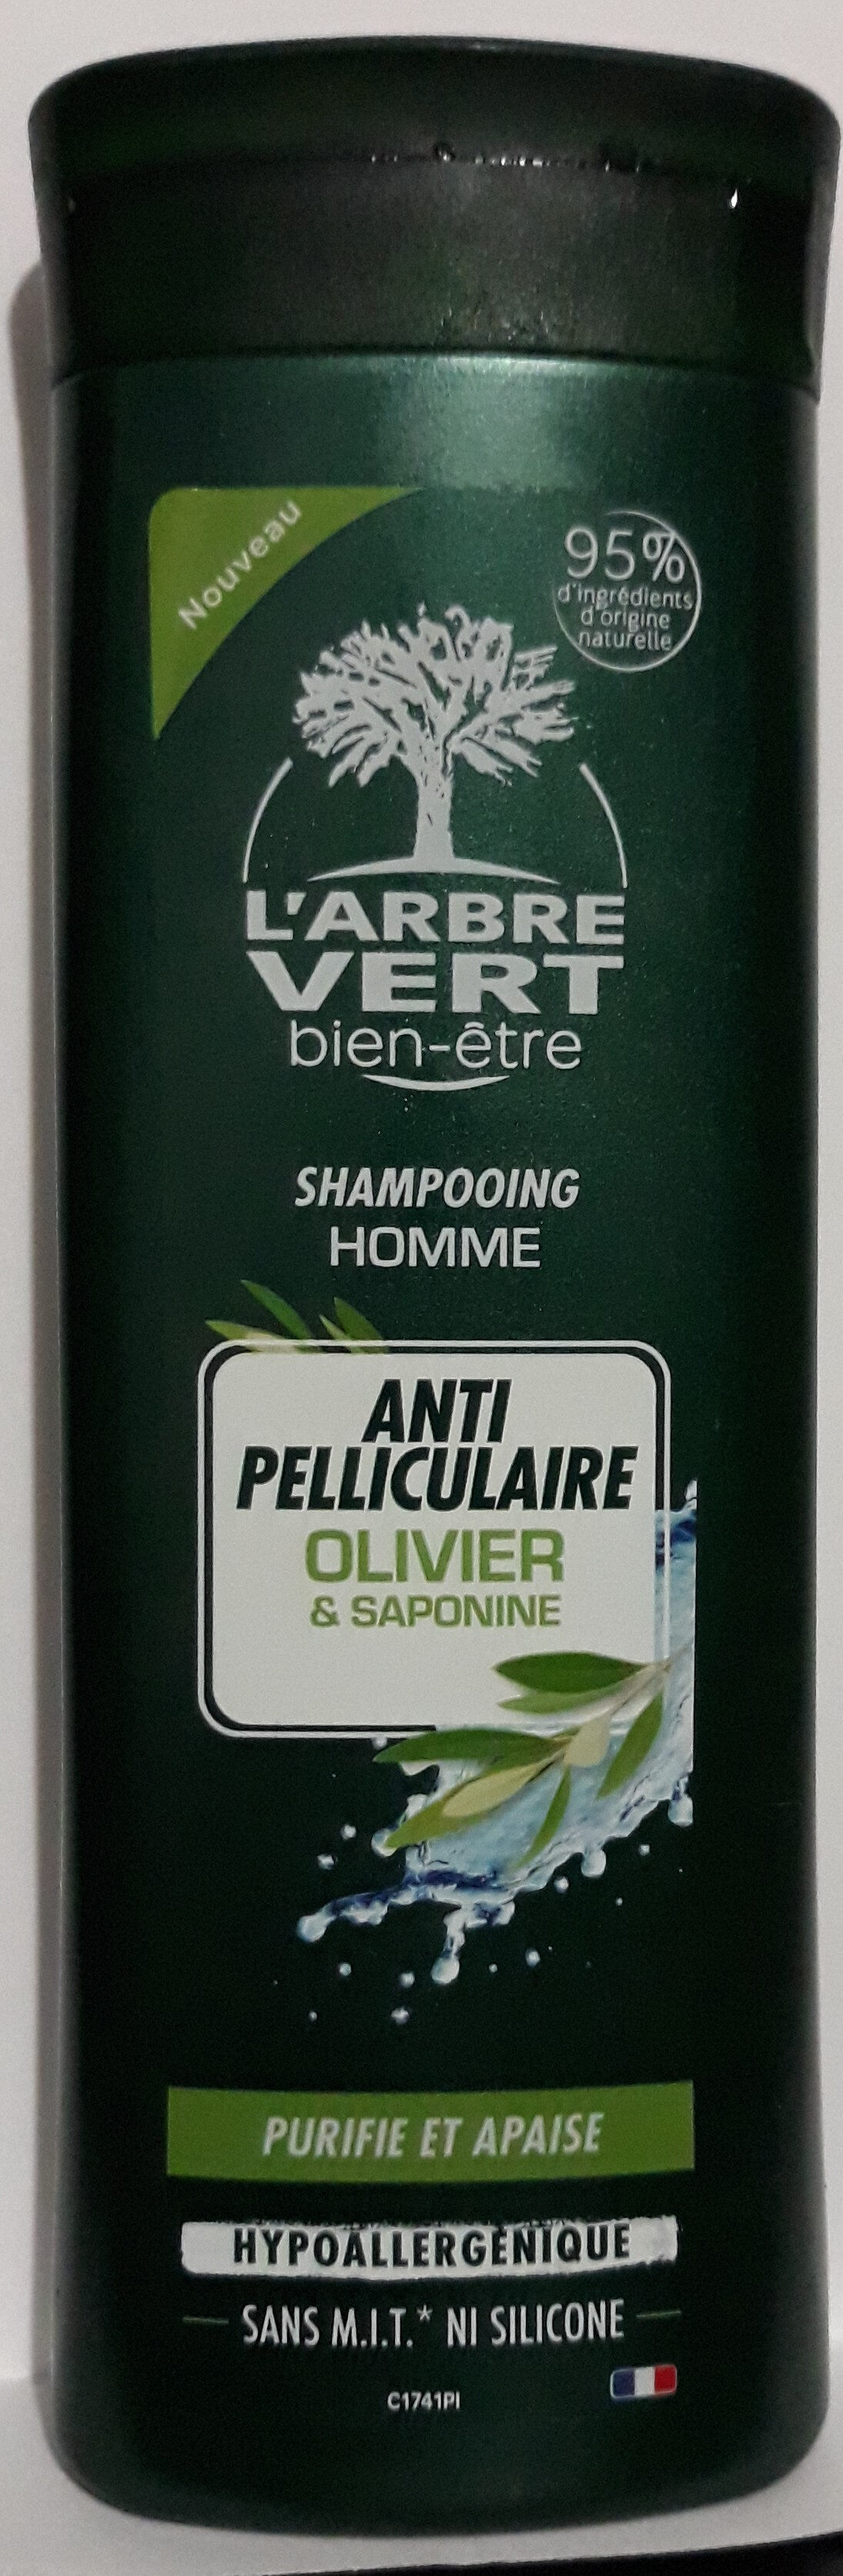 shampooing homme anti pelliculaire olivier & saponine - Product - fr